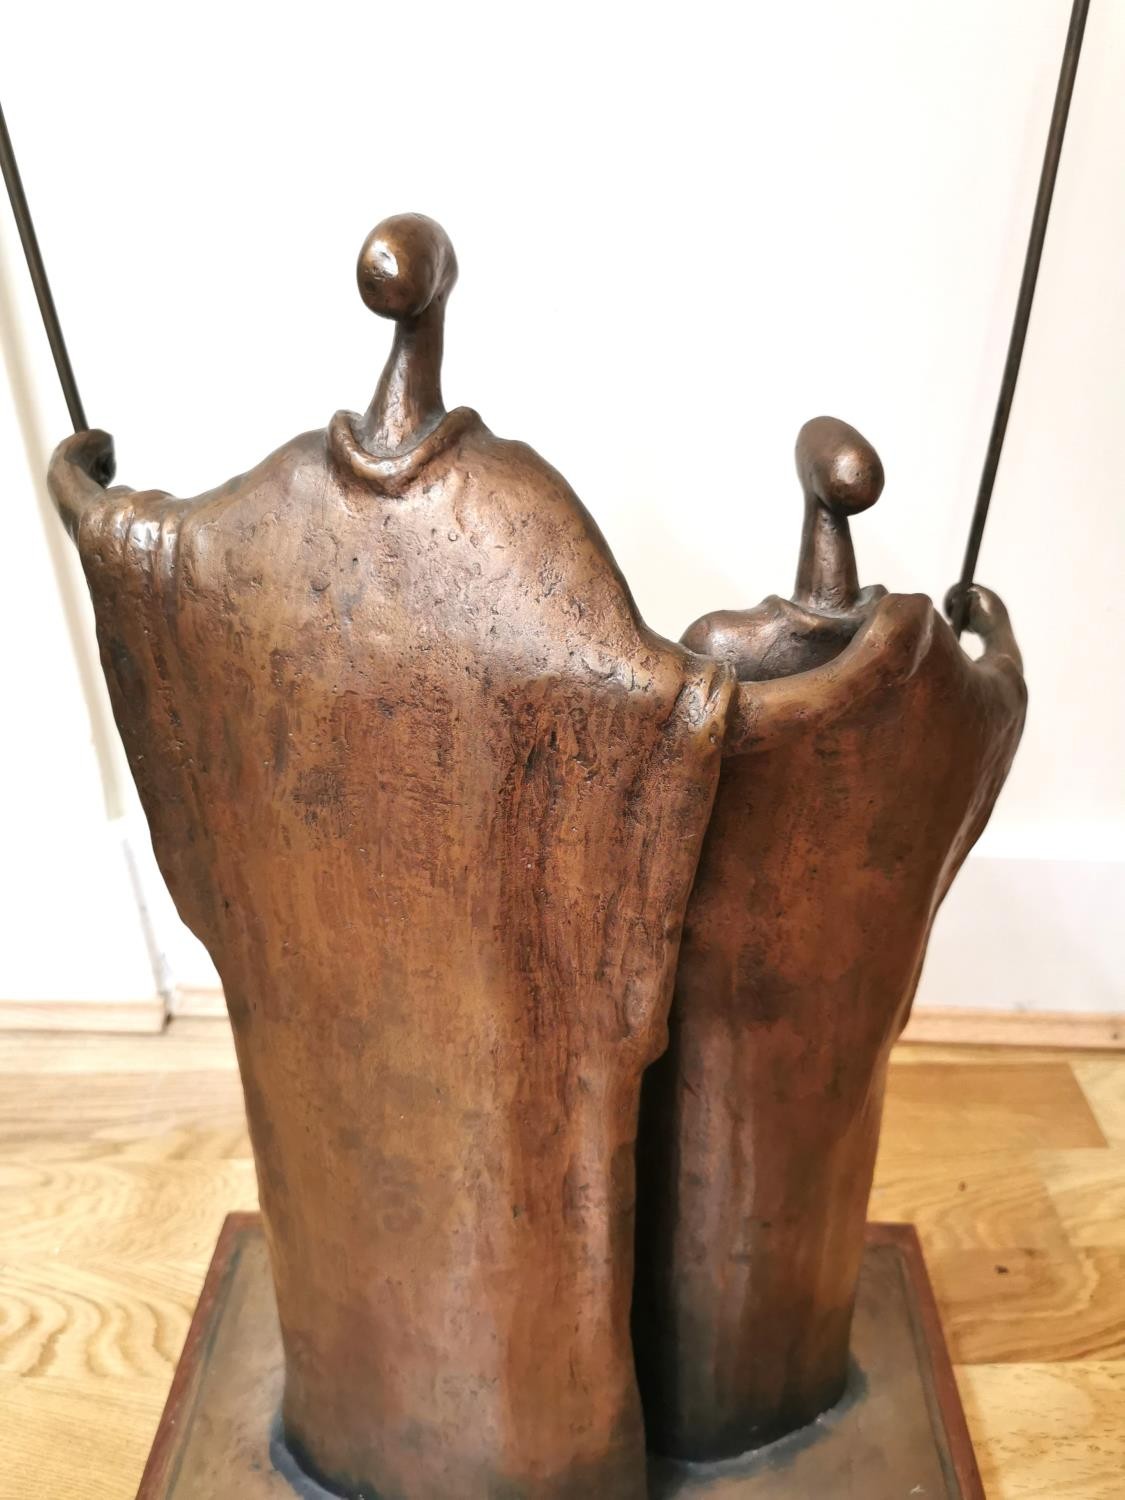 Wim De Roubaix, South African artist, large bronze sculpture of two robed figures holding spears - Image 9 of 11